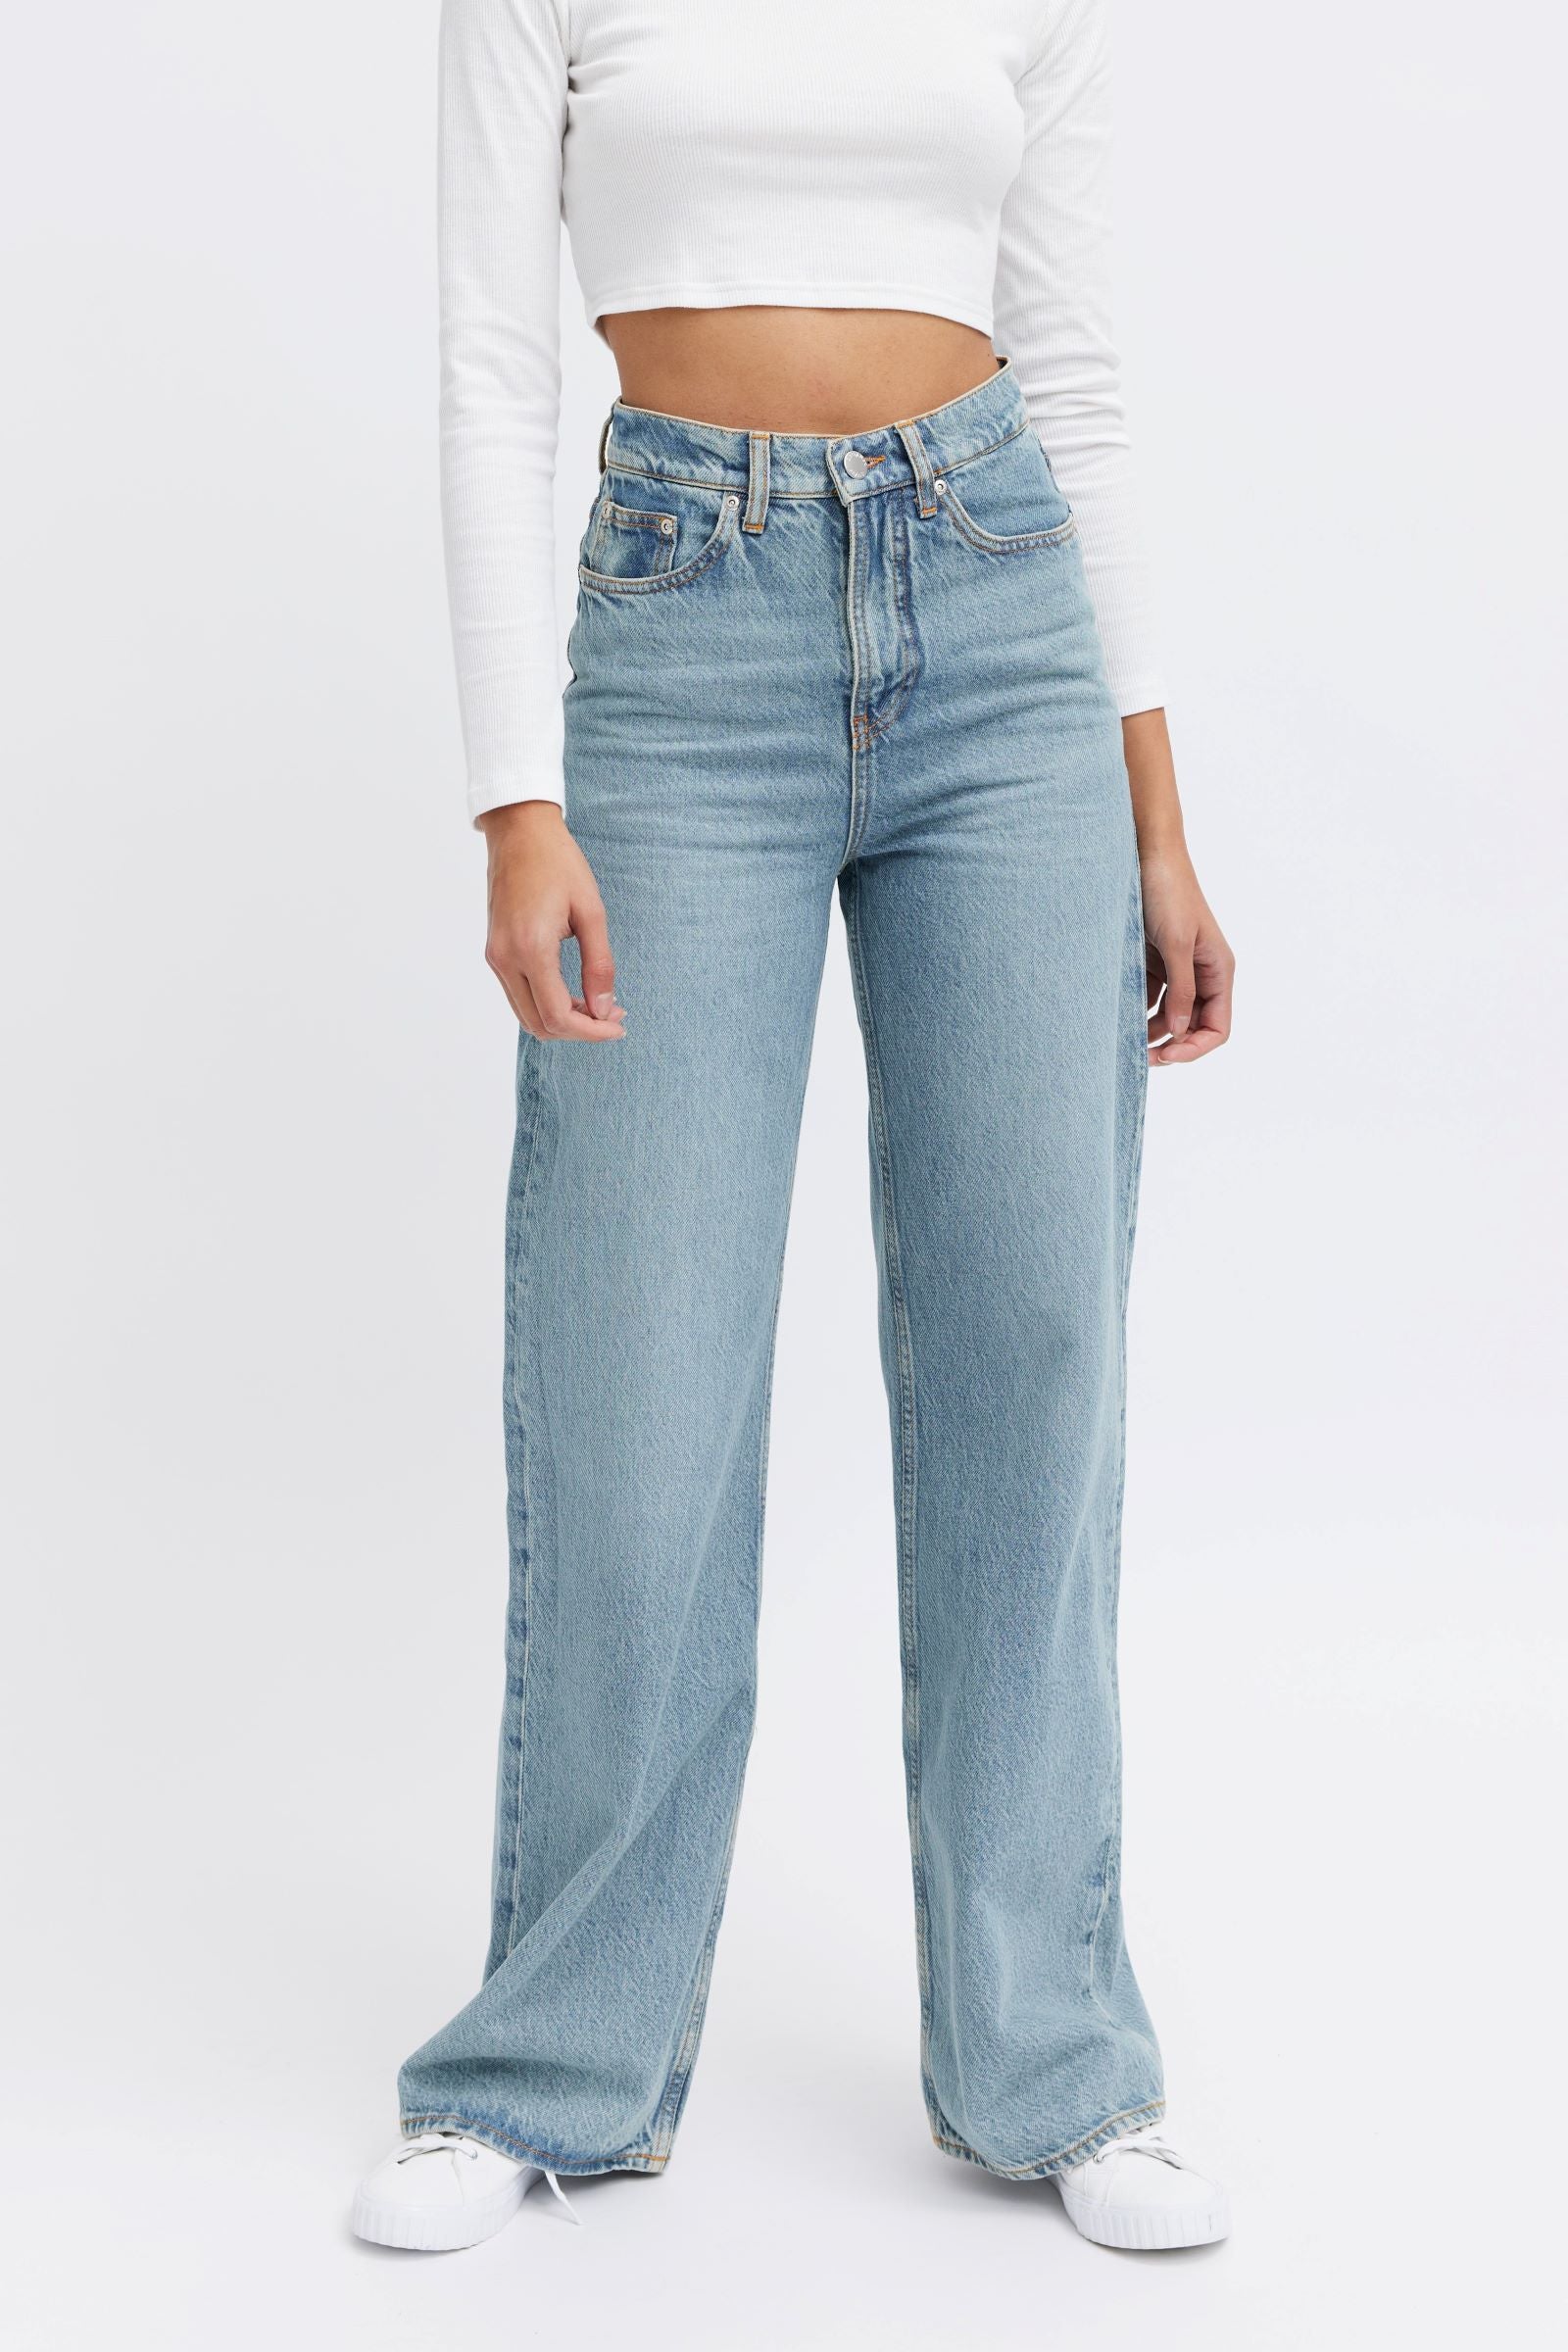 Wide Leg & Flare Jeans | High Waisted & Low Rise Fit | Wave™ Jeans ...